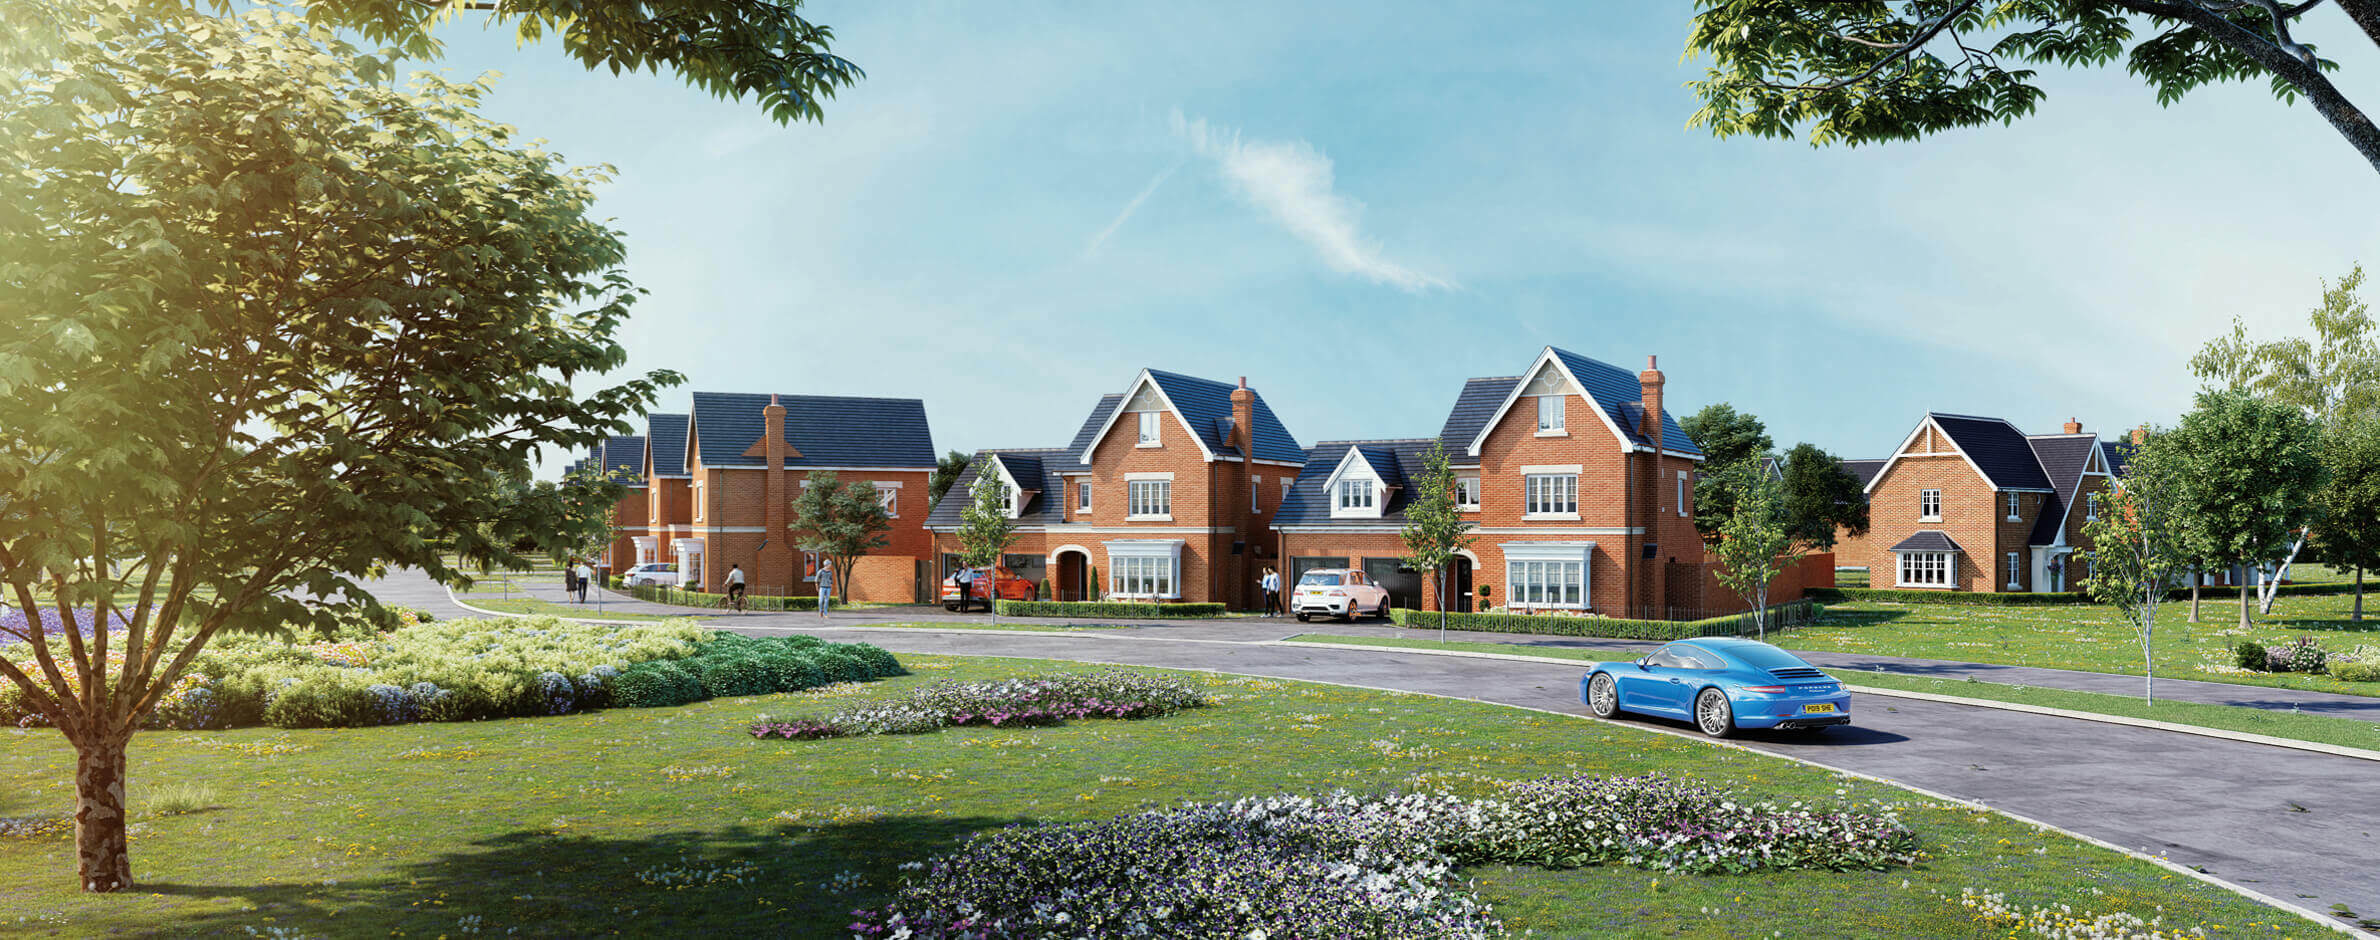 Start you new life in a new home at Chesterwell, Colchester by Mersea Homes